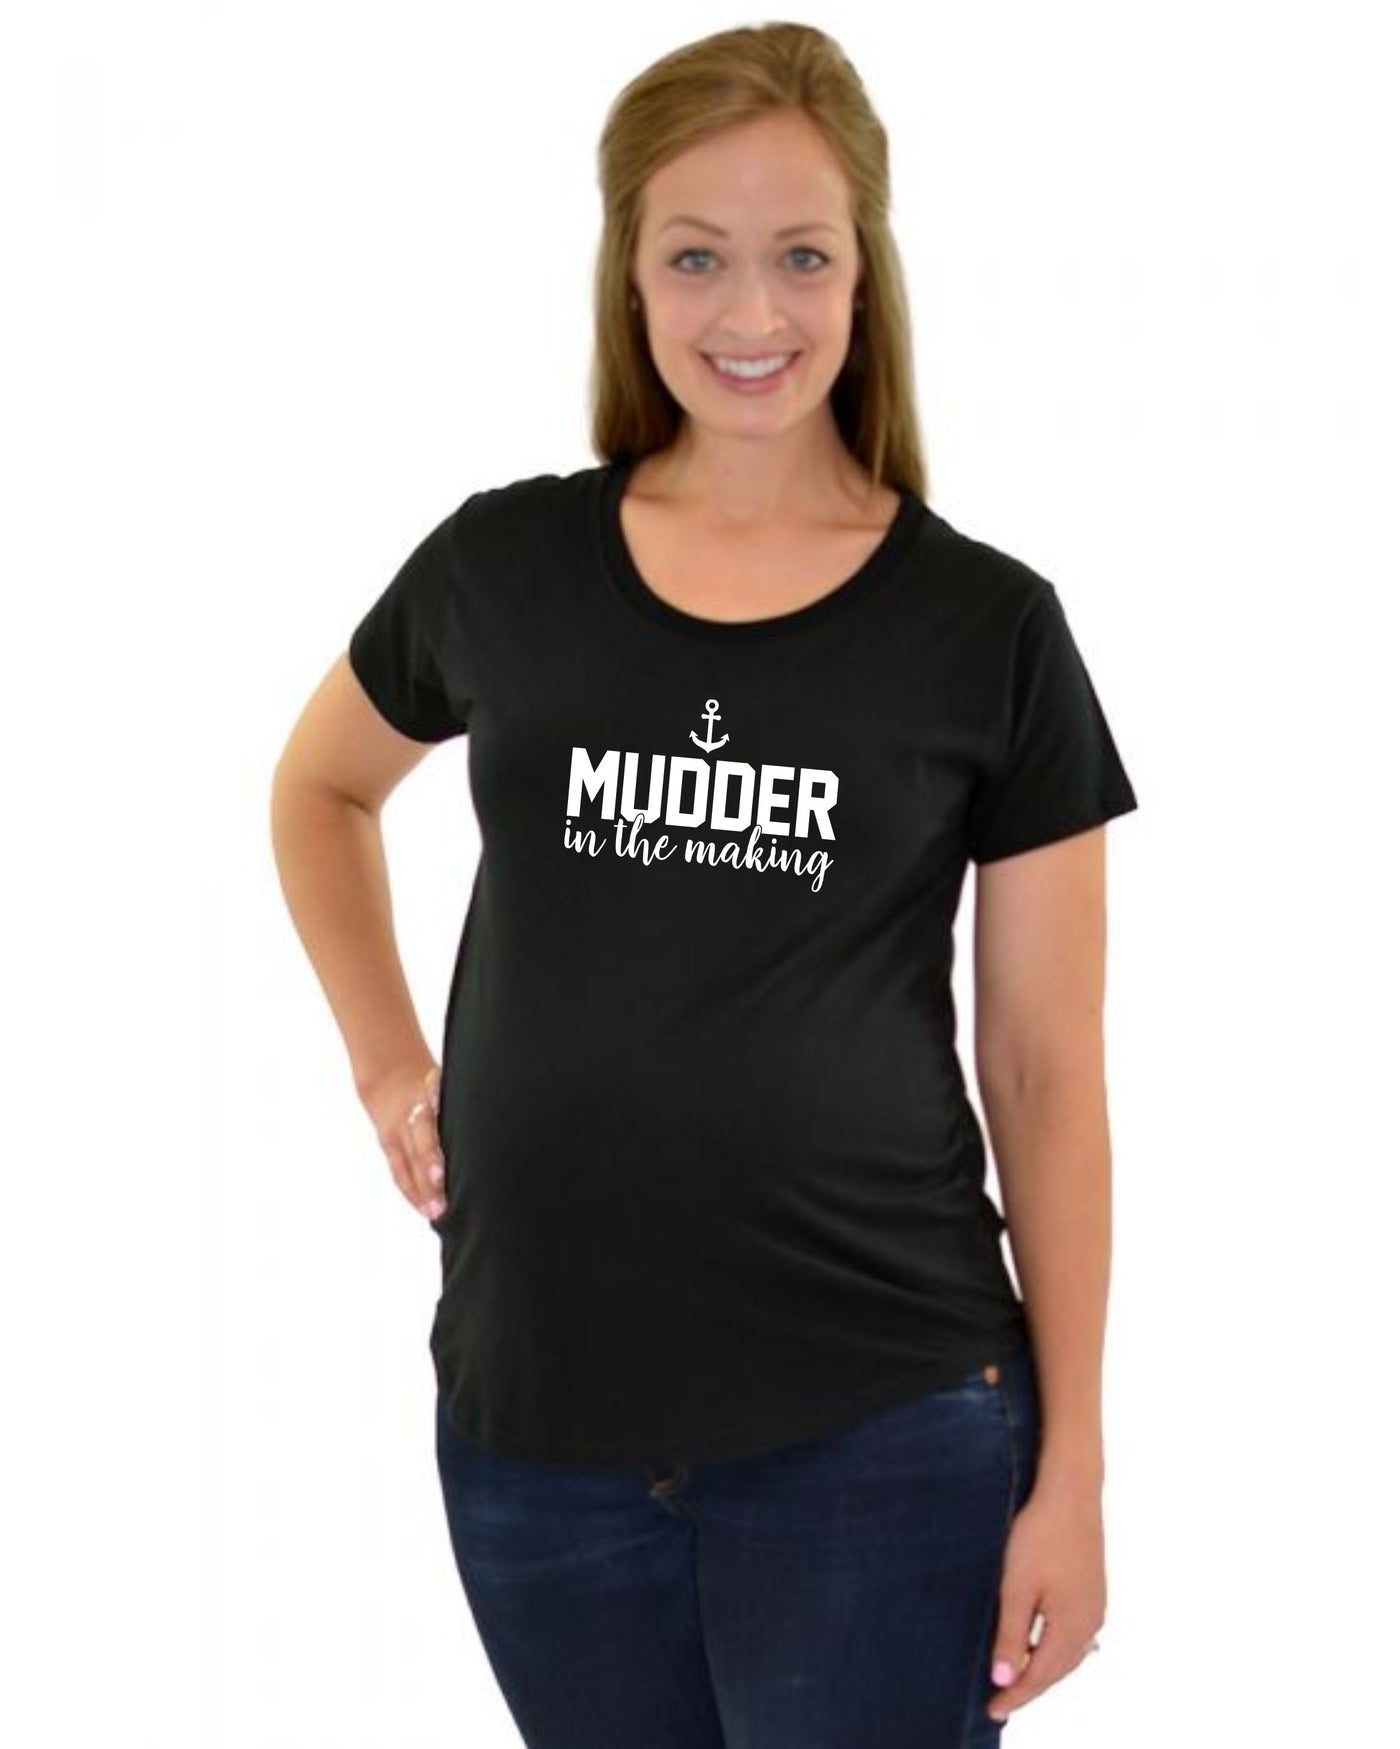 "Mudder In The Making" Maternity T-Shirt